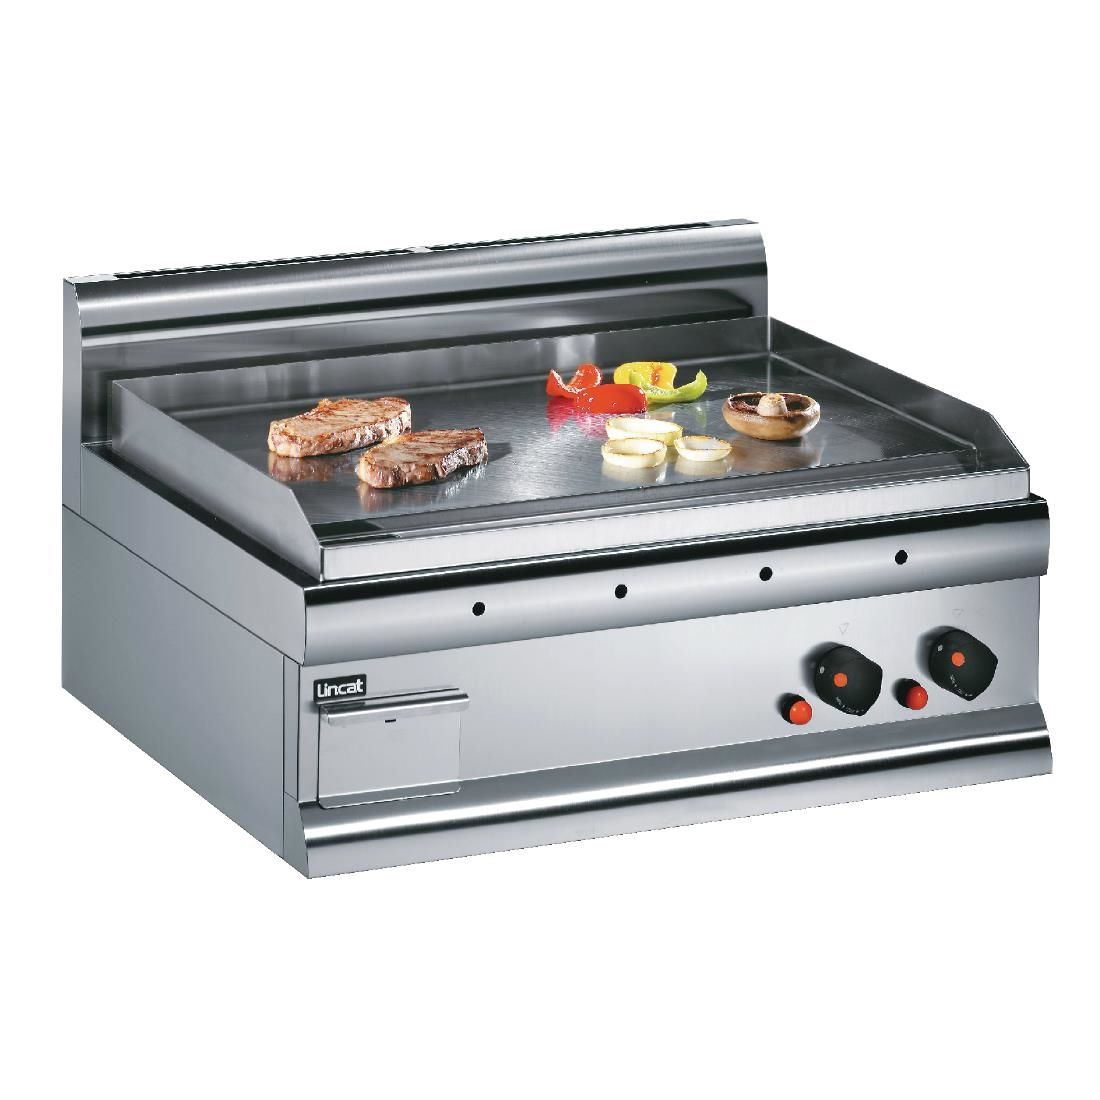 F999 Lincat Silverlink 600 Machined Steel Dual Zone Natural/LPG Griddle GS7 JD Catering Equipment Solutions Ltd